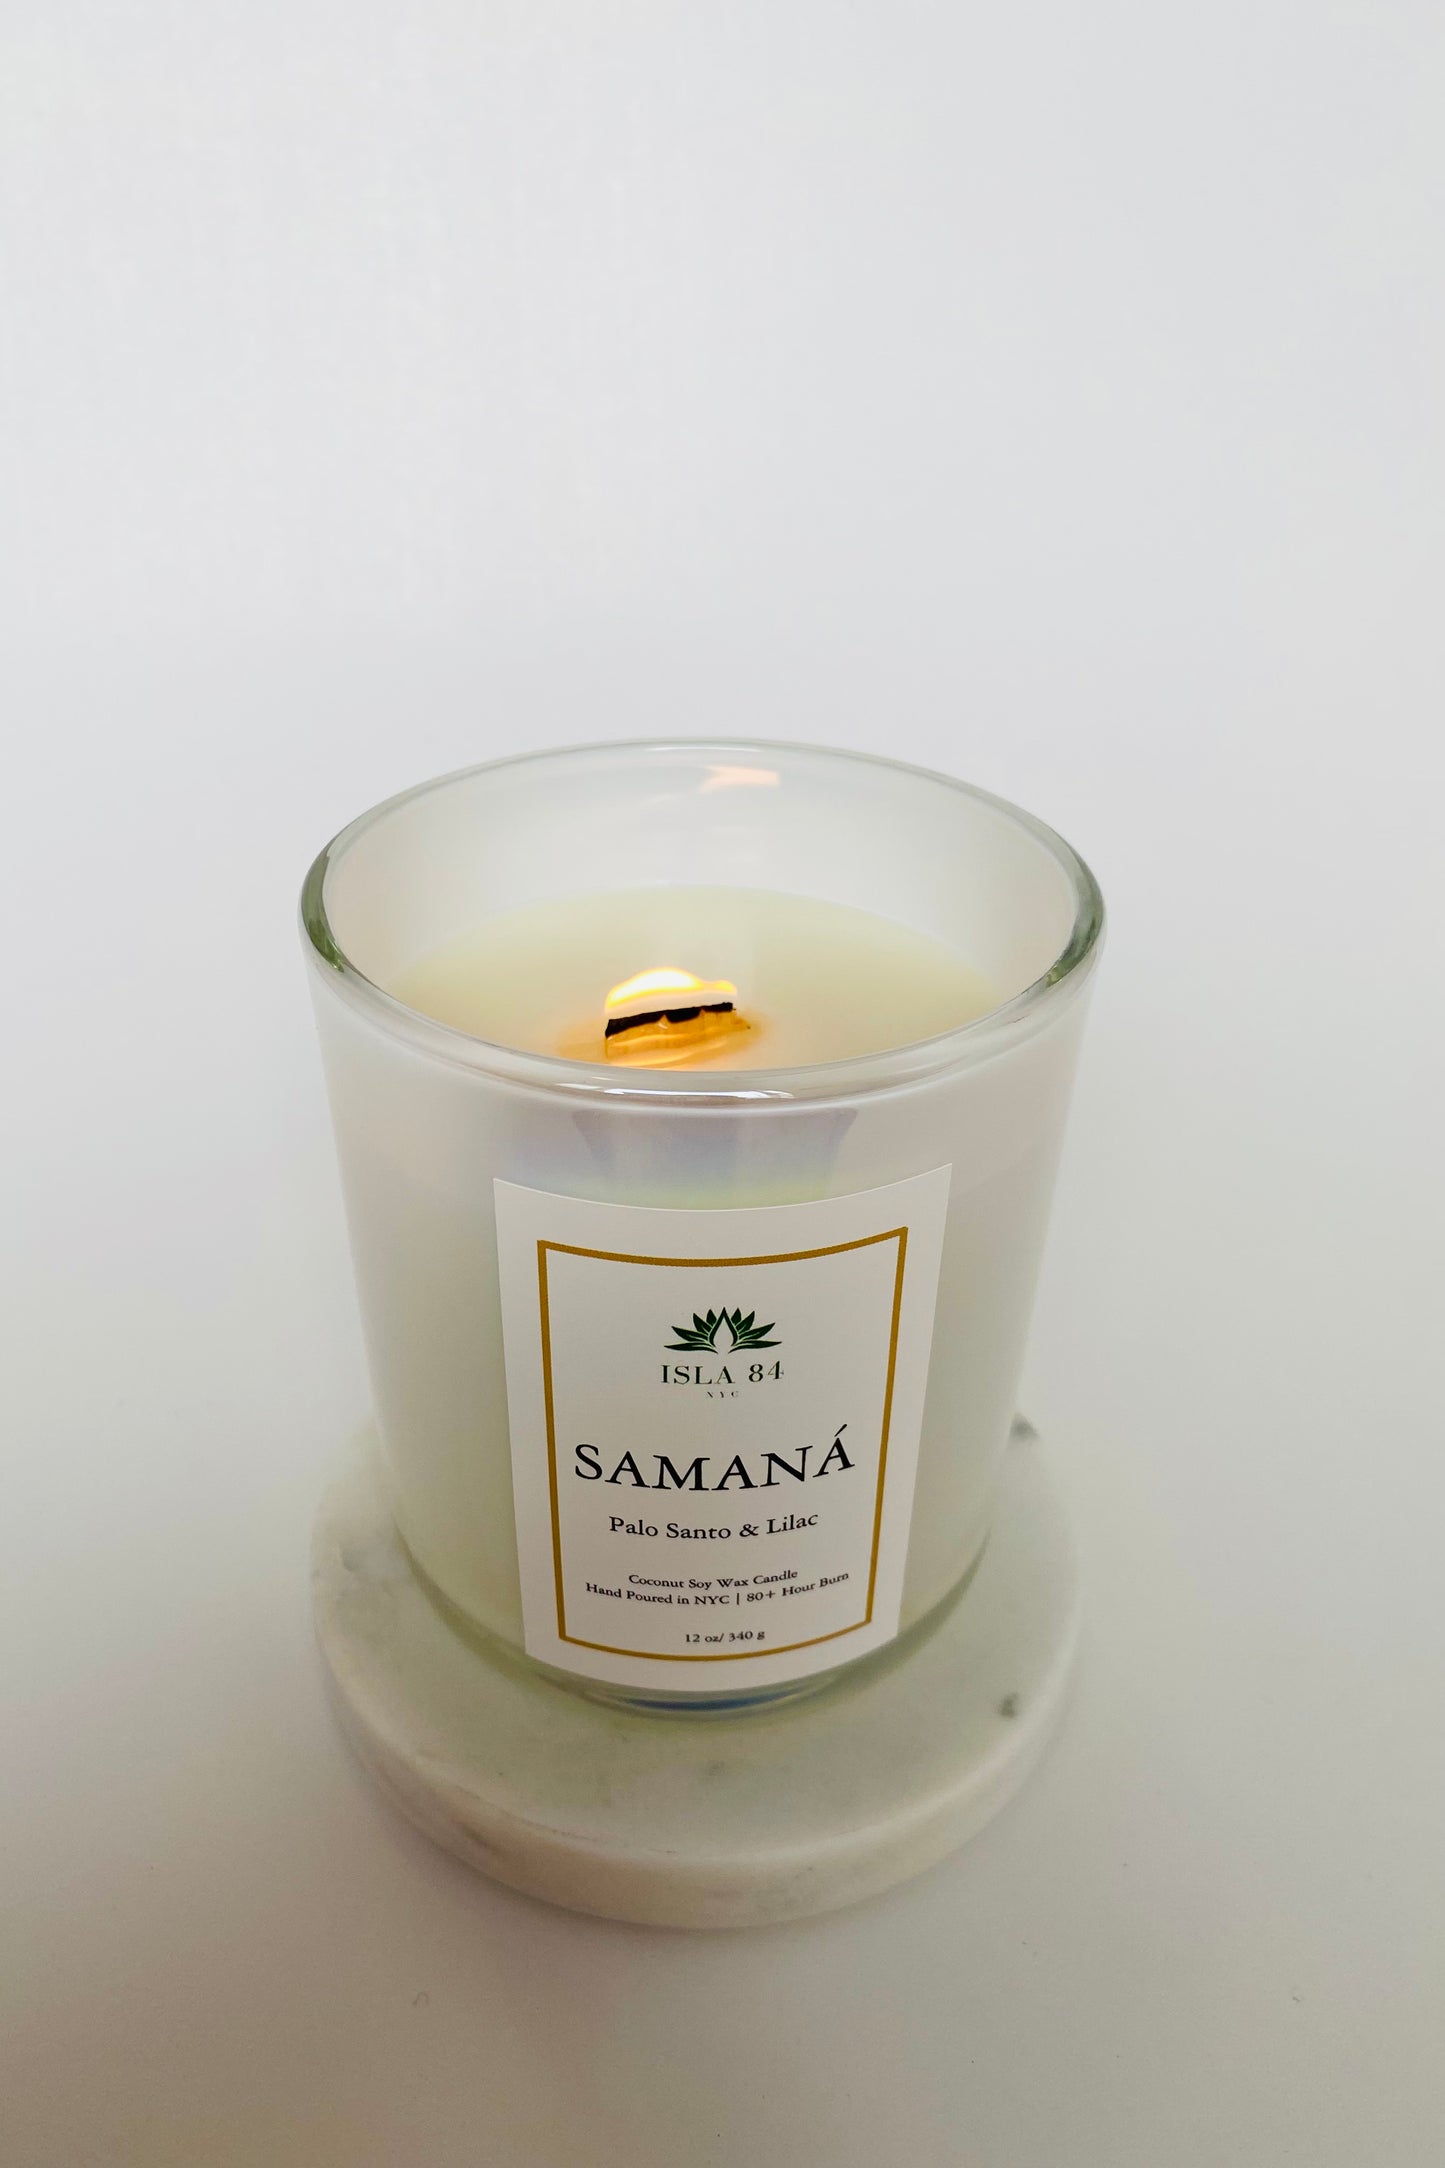 Samana Signature Scented Candle; Palo Santo & Lilac Candle; Coconut Soy Wax Candle with Wood Wick; Latino Candles; Dominican Candles; DR Candles; Burning Wood Wick